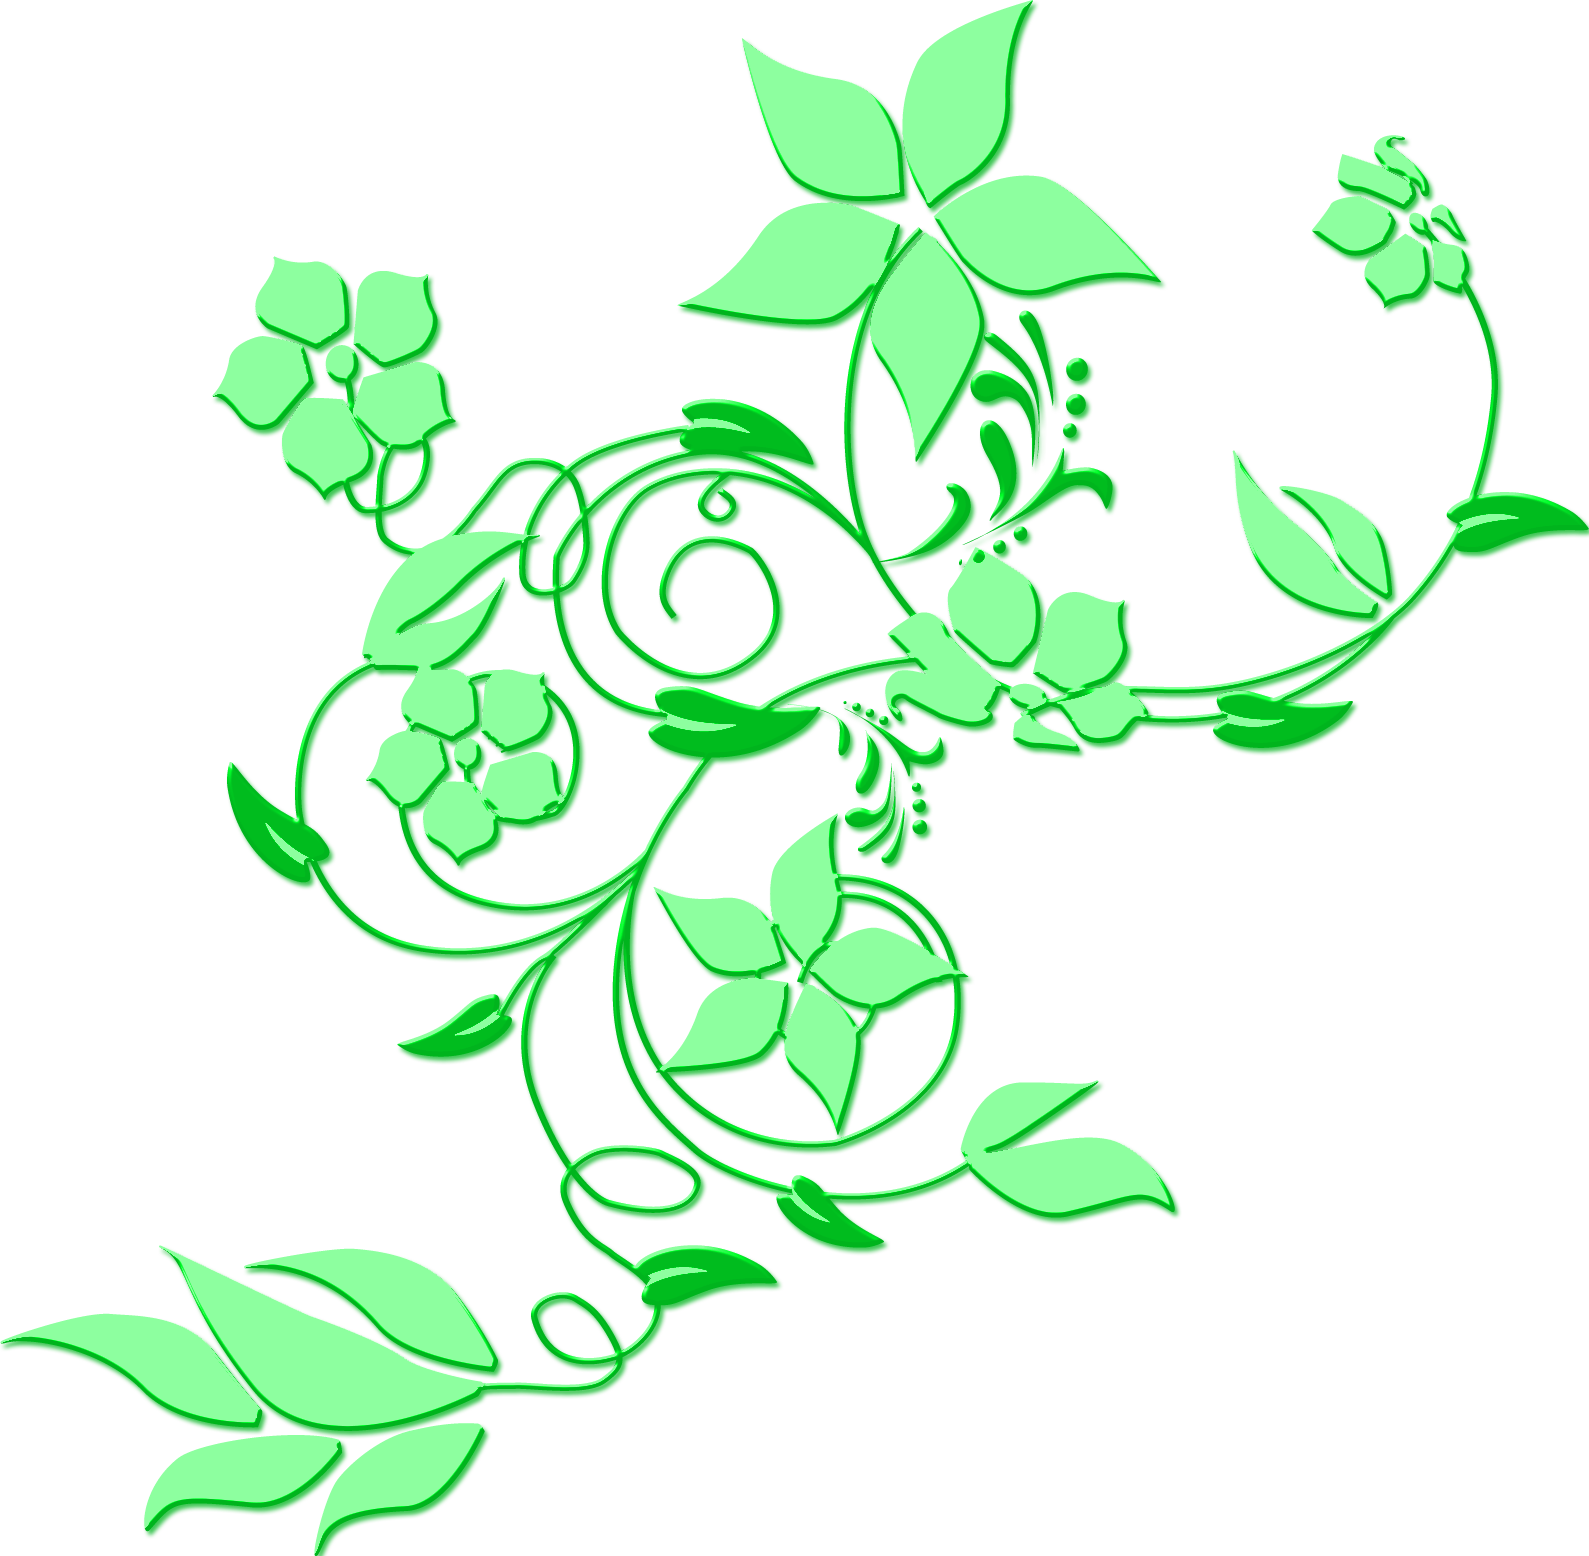 Vector green flowers drawing free image download